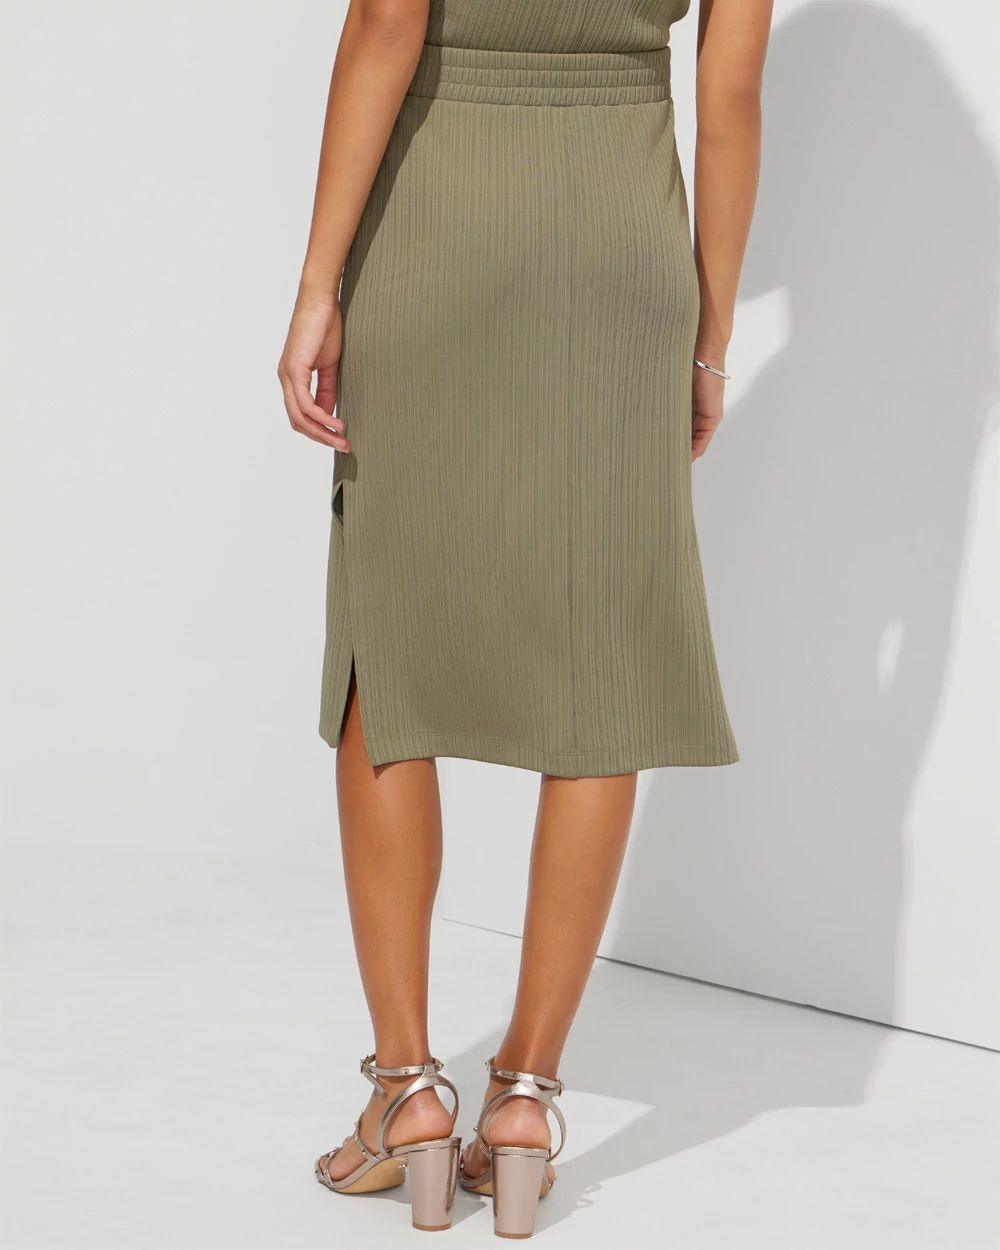 Outlet WHBM Pull On Midi Skirt click to view larger image.